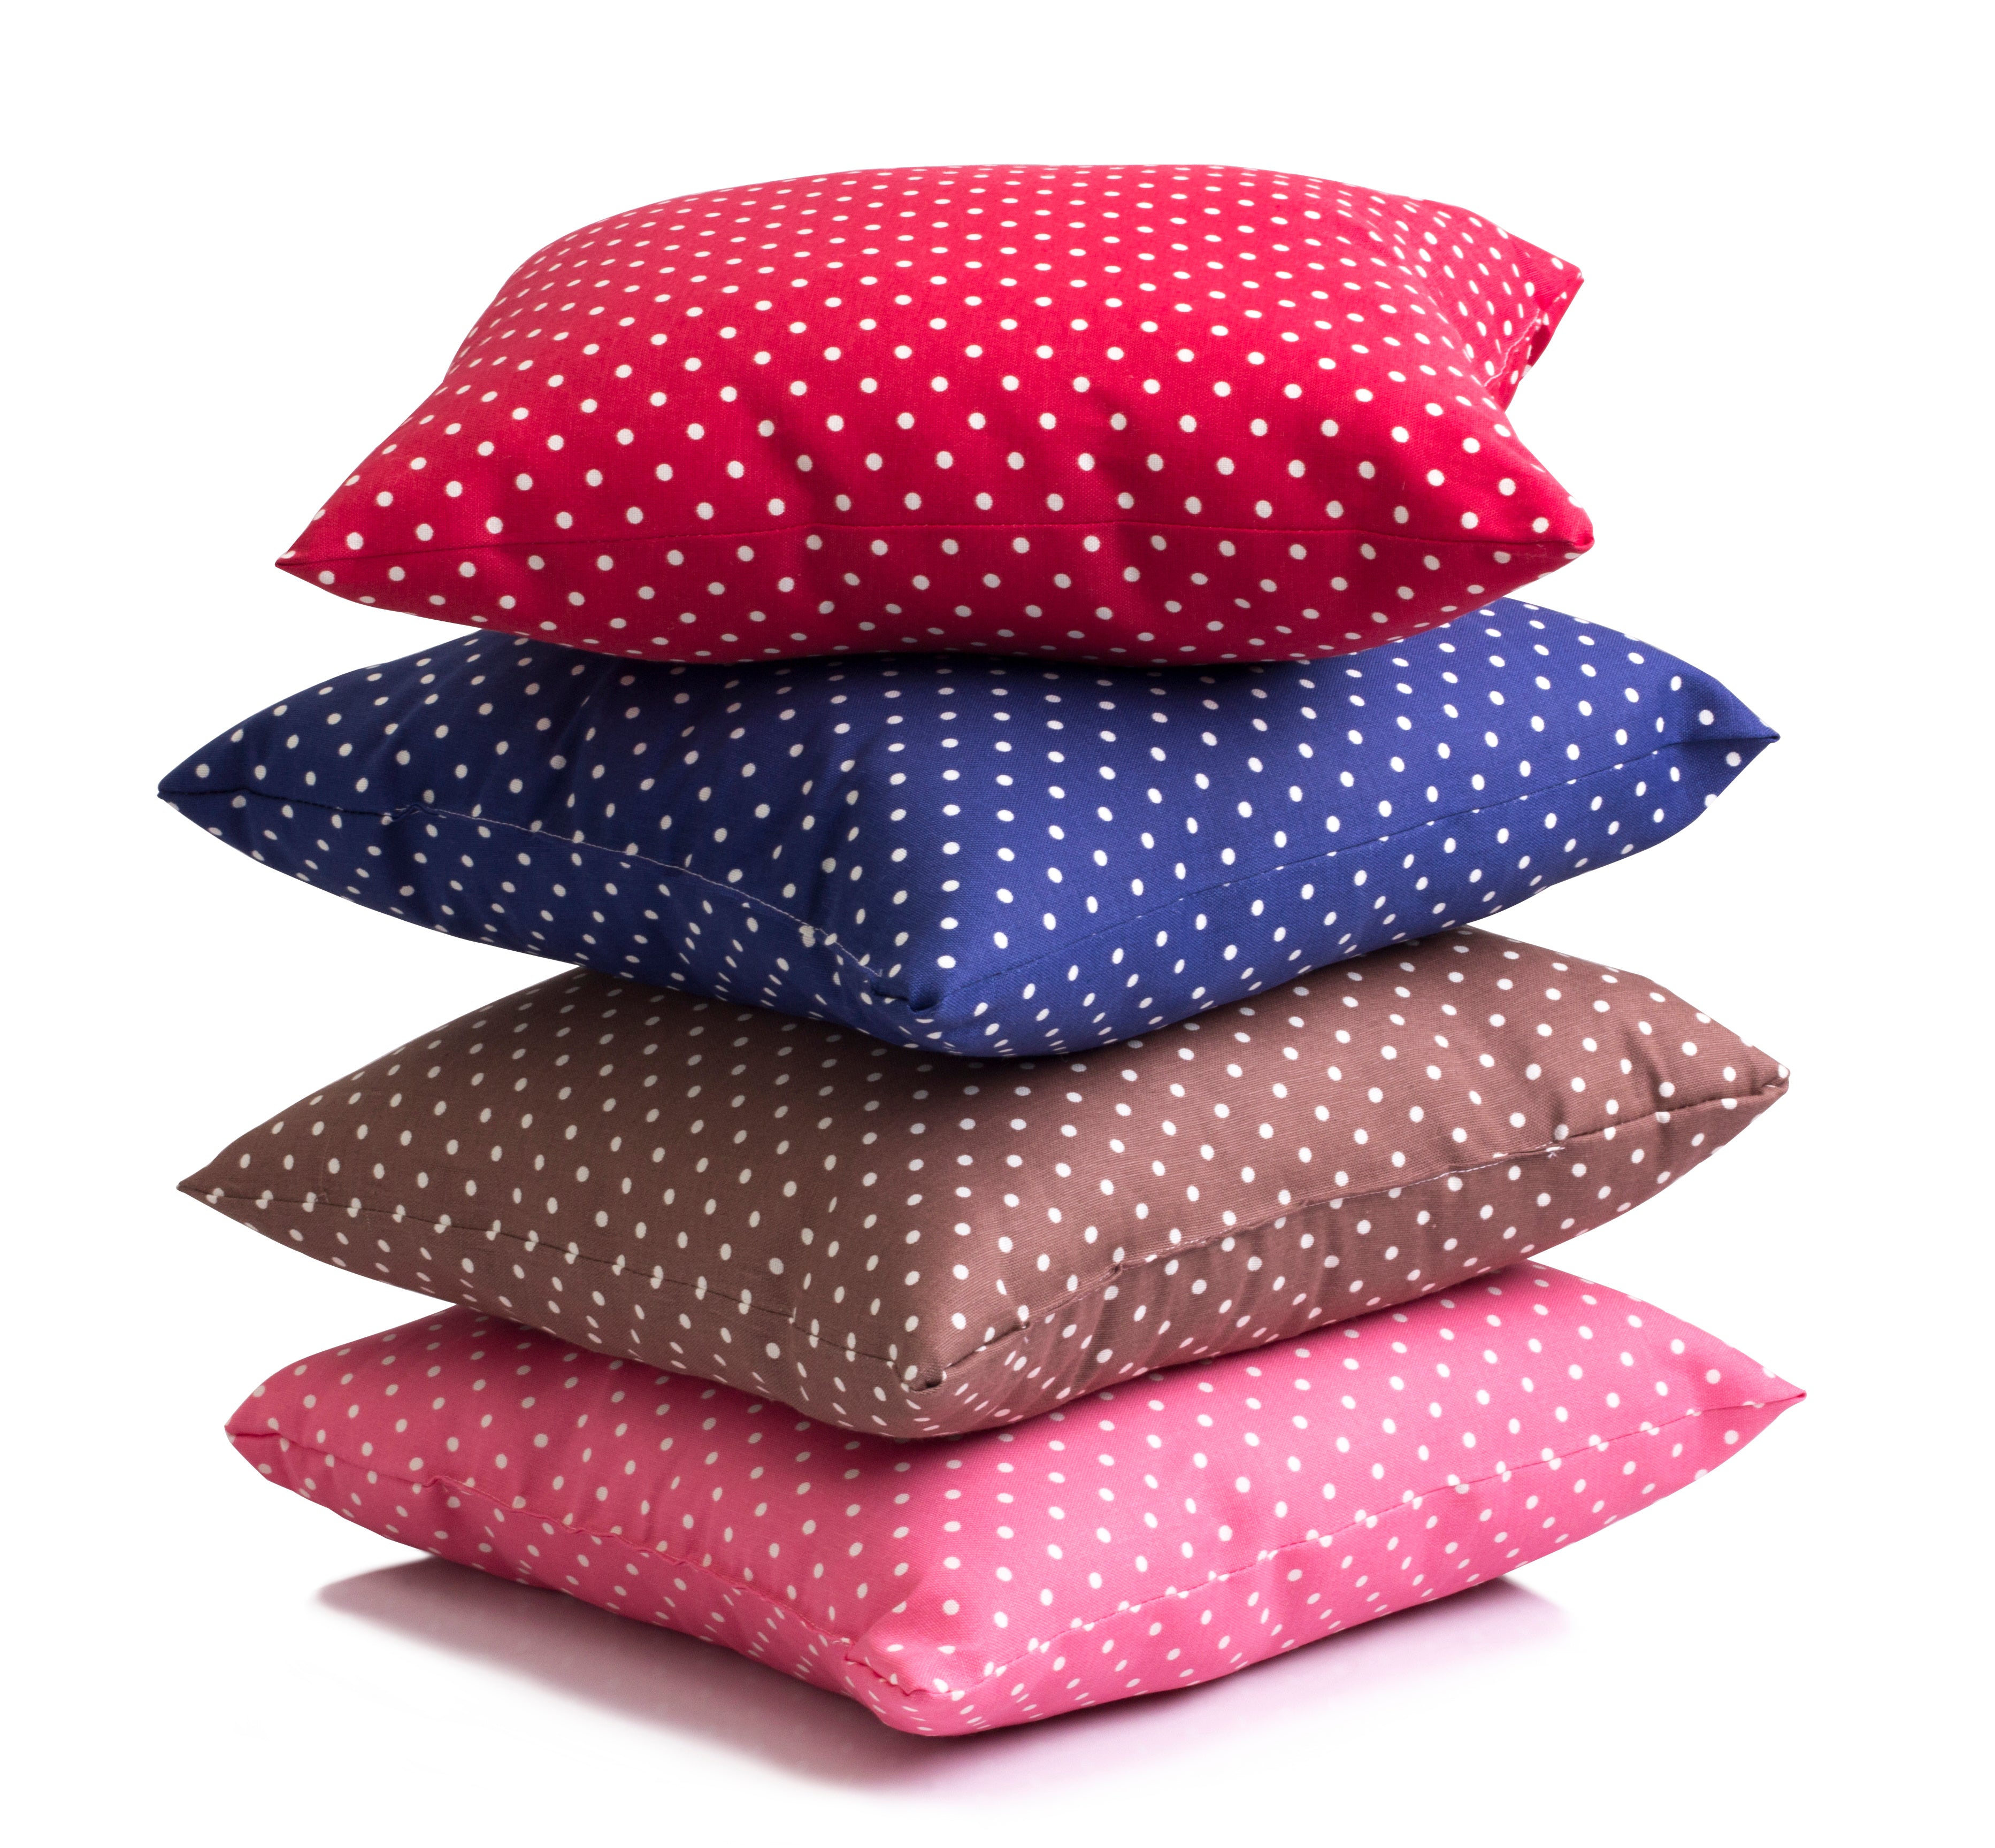 A Comprehensive History of Polka Dots Throughout the Centuries